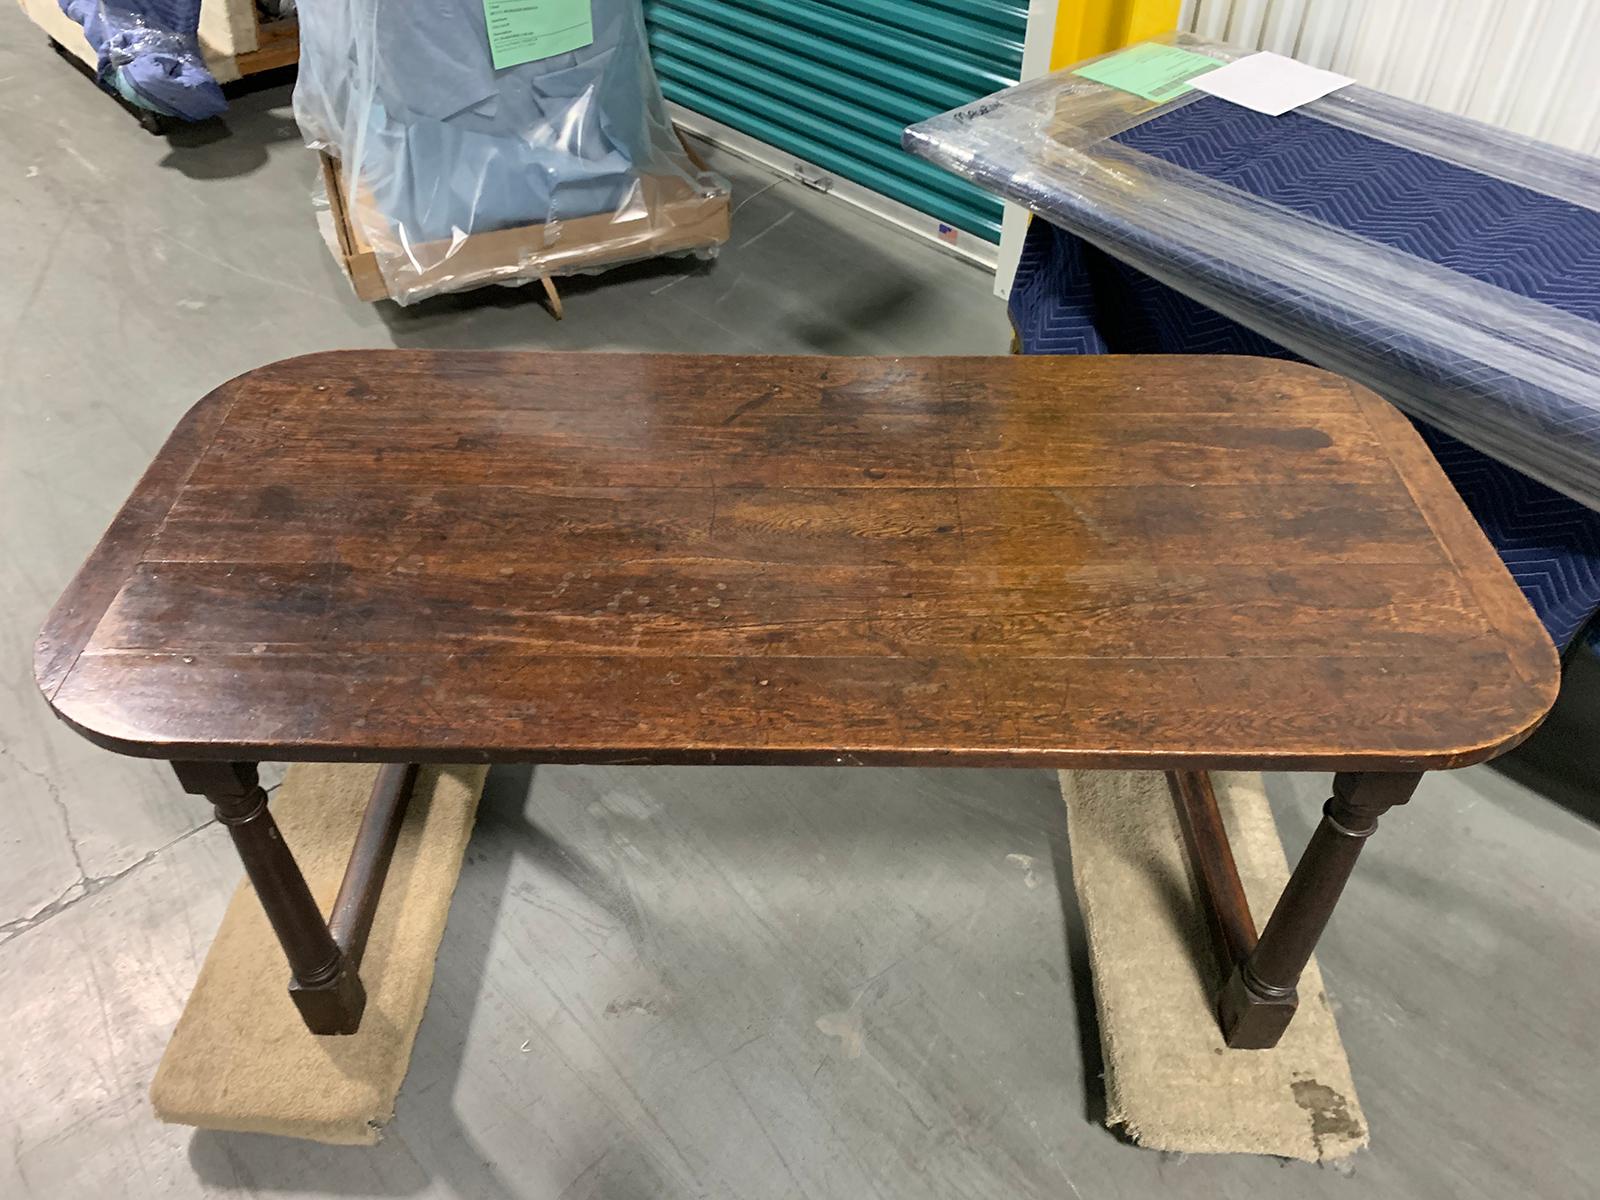 19th century English oak refectory table
Would be great as a work table or kitchen table
Measures: 64.75